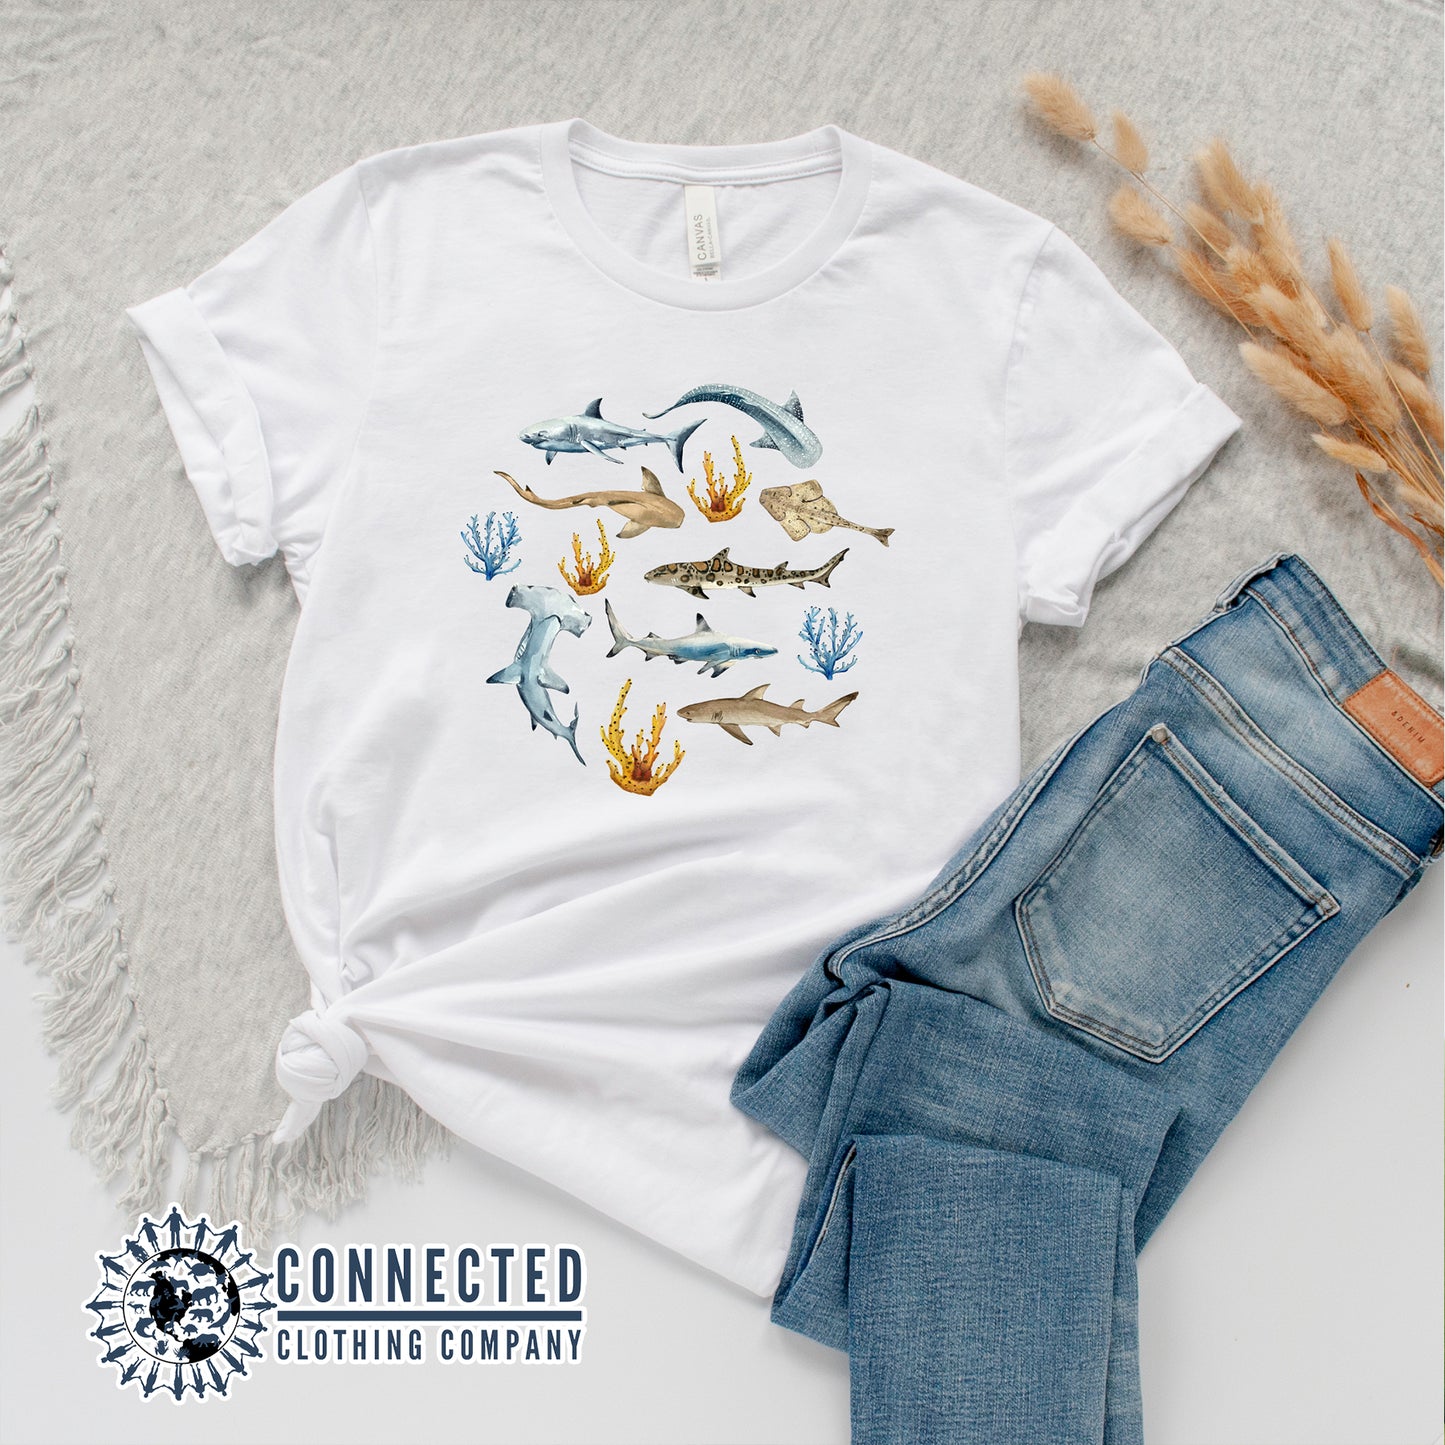 Flatlay of White Shark Ocean Watercolor Unisex Short-Sleeve Tshirt - Connected Clothing Company - Ethically and Sustainably Made - 10% of profits donated to shark conservation and ocean conservation